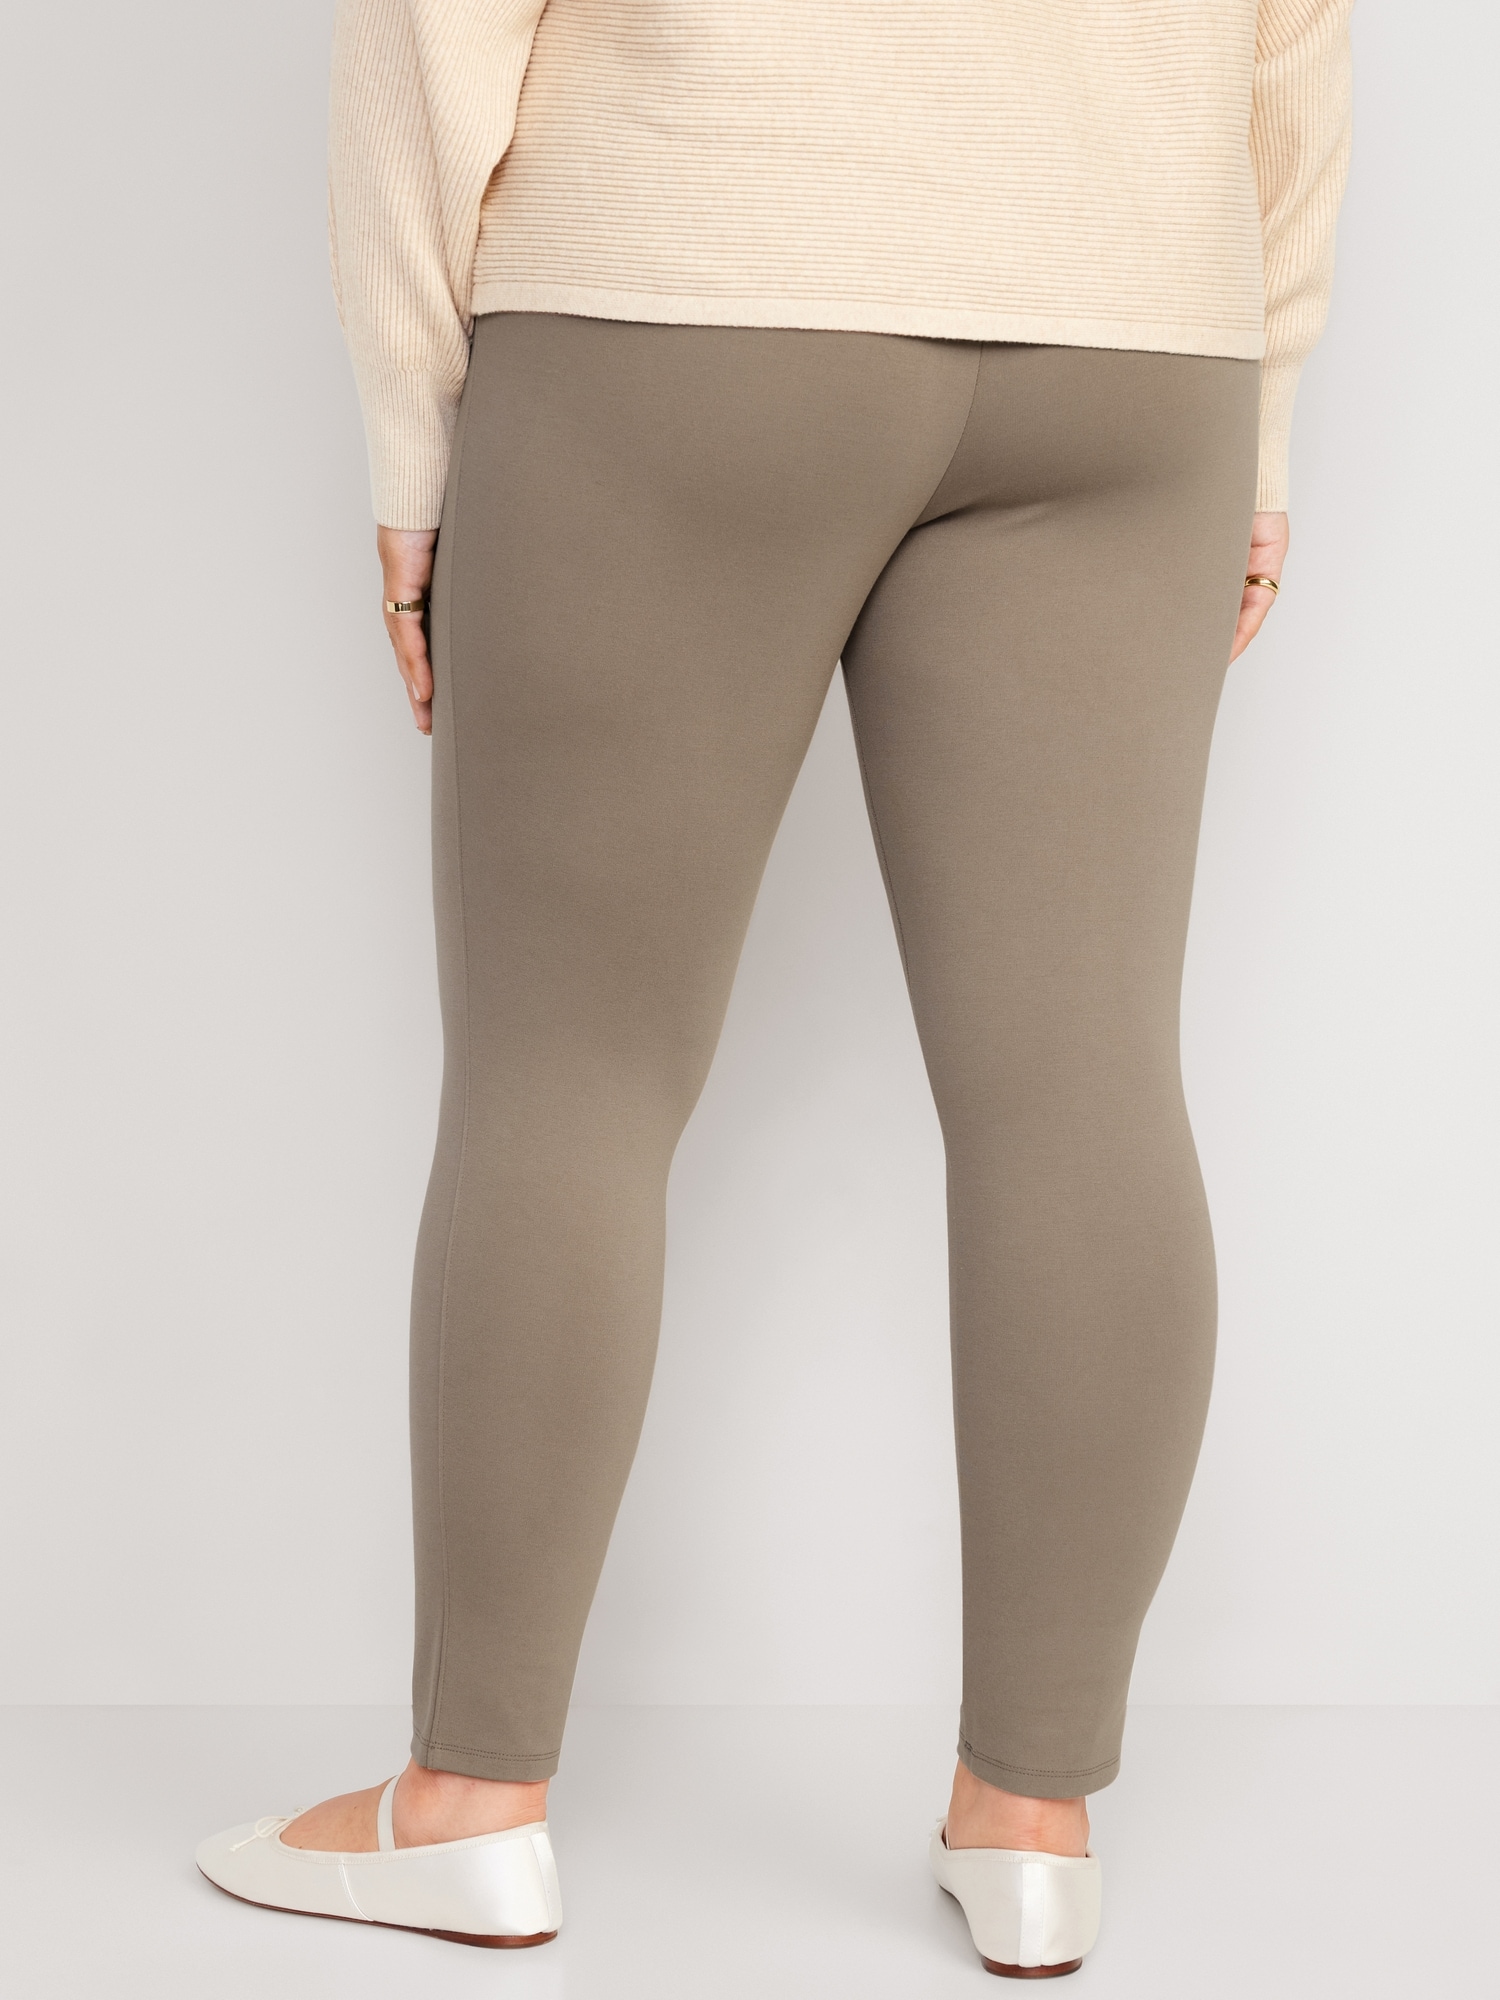 STEVIE HIGH WAISTED LEGGINGS IN TAUPE  Colored leggings outfit, Style  leggings casual, Leggings outfit fall